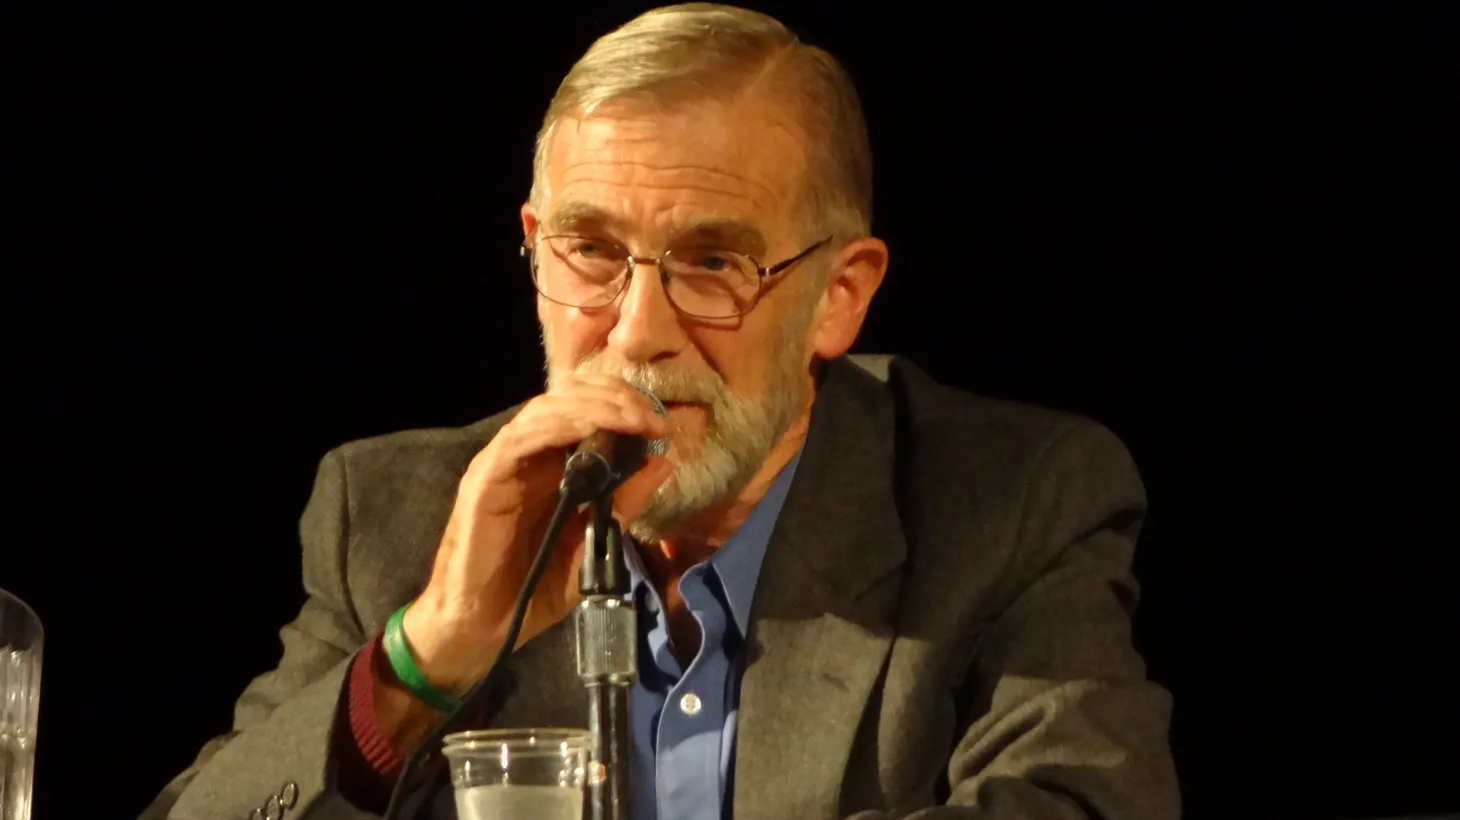 Former CIA Analyst Ray McGovern at Whistle Blower Conference Berkeley 2012.